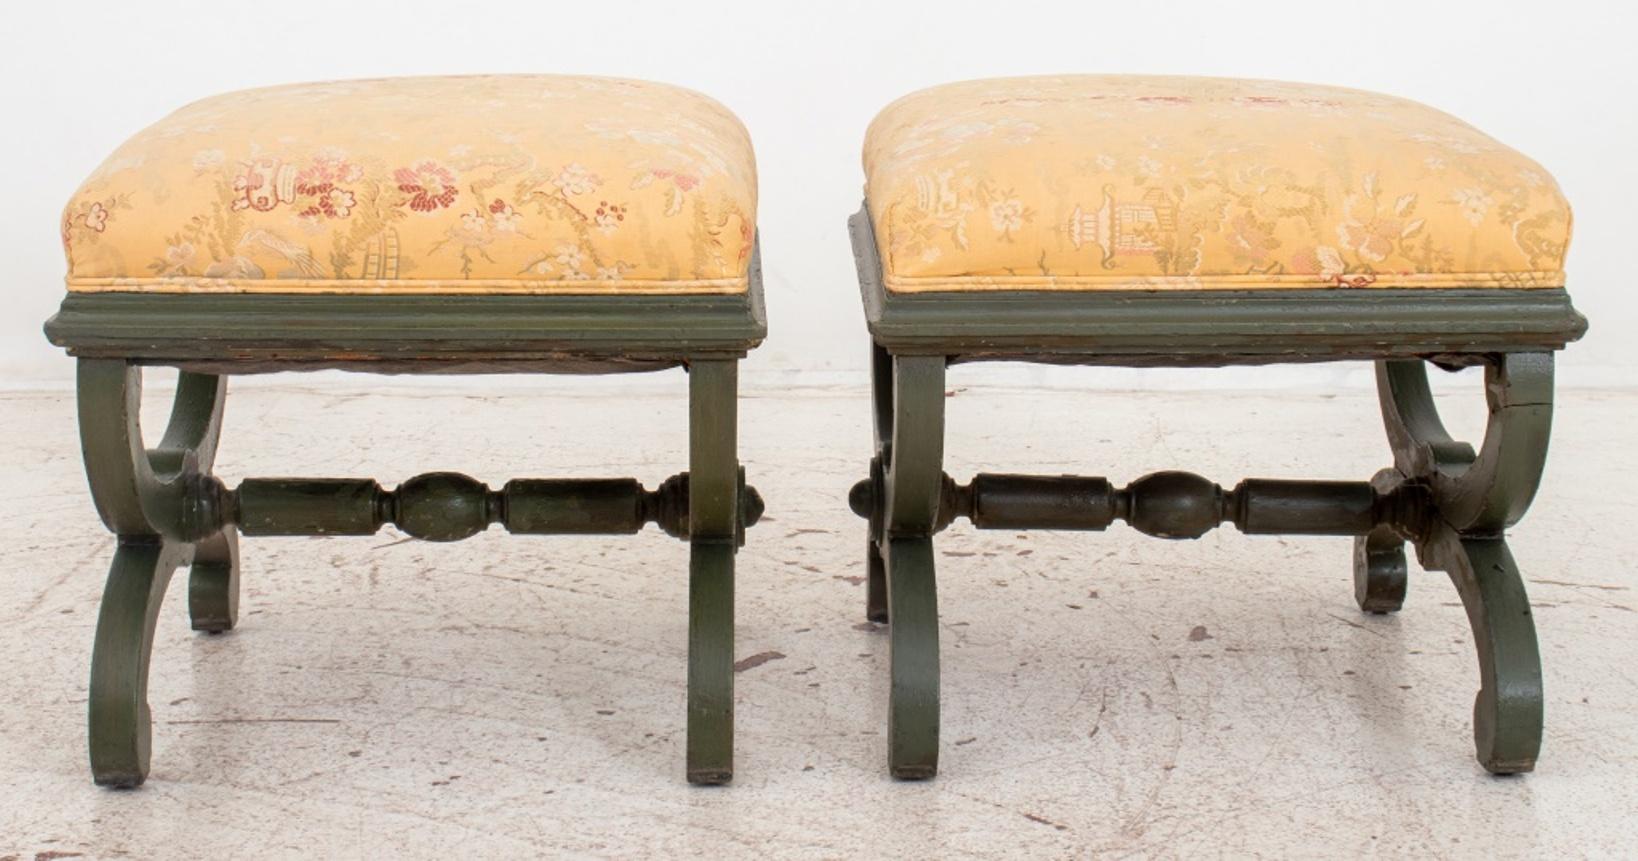 Victorian Upholstered Painted Wood Stools, Pair In Good Condition For Sale In New York, NY